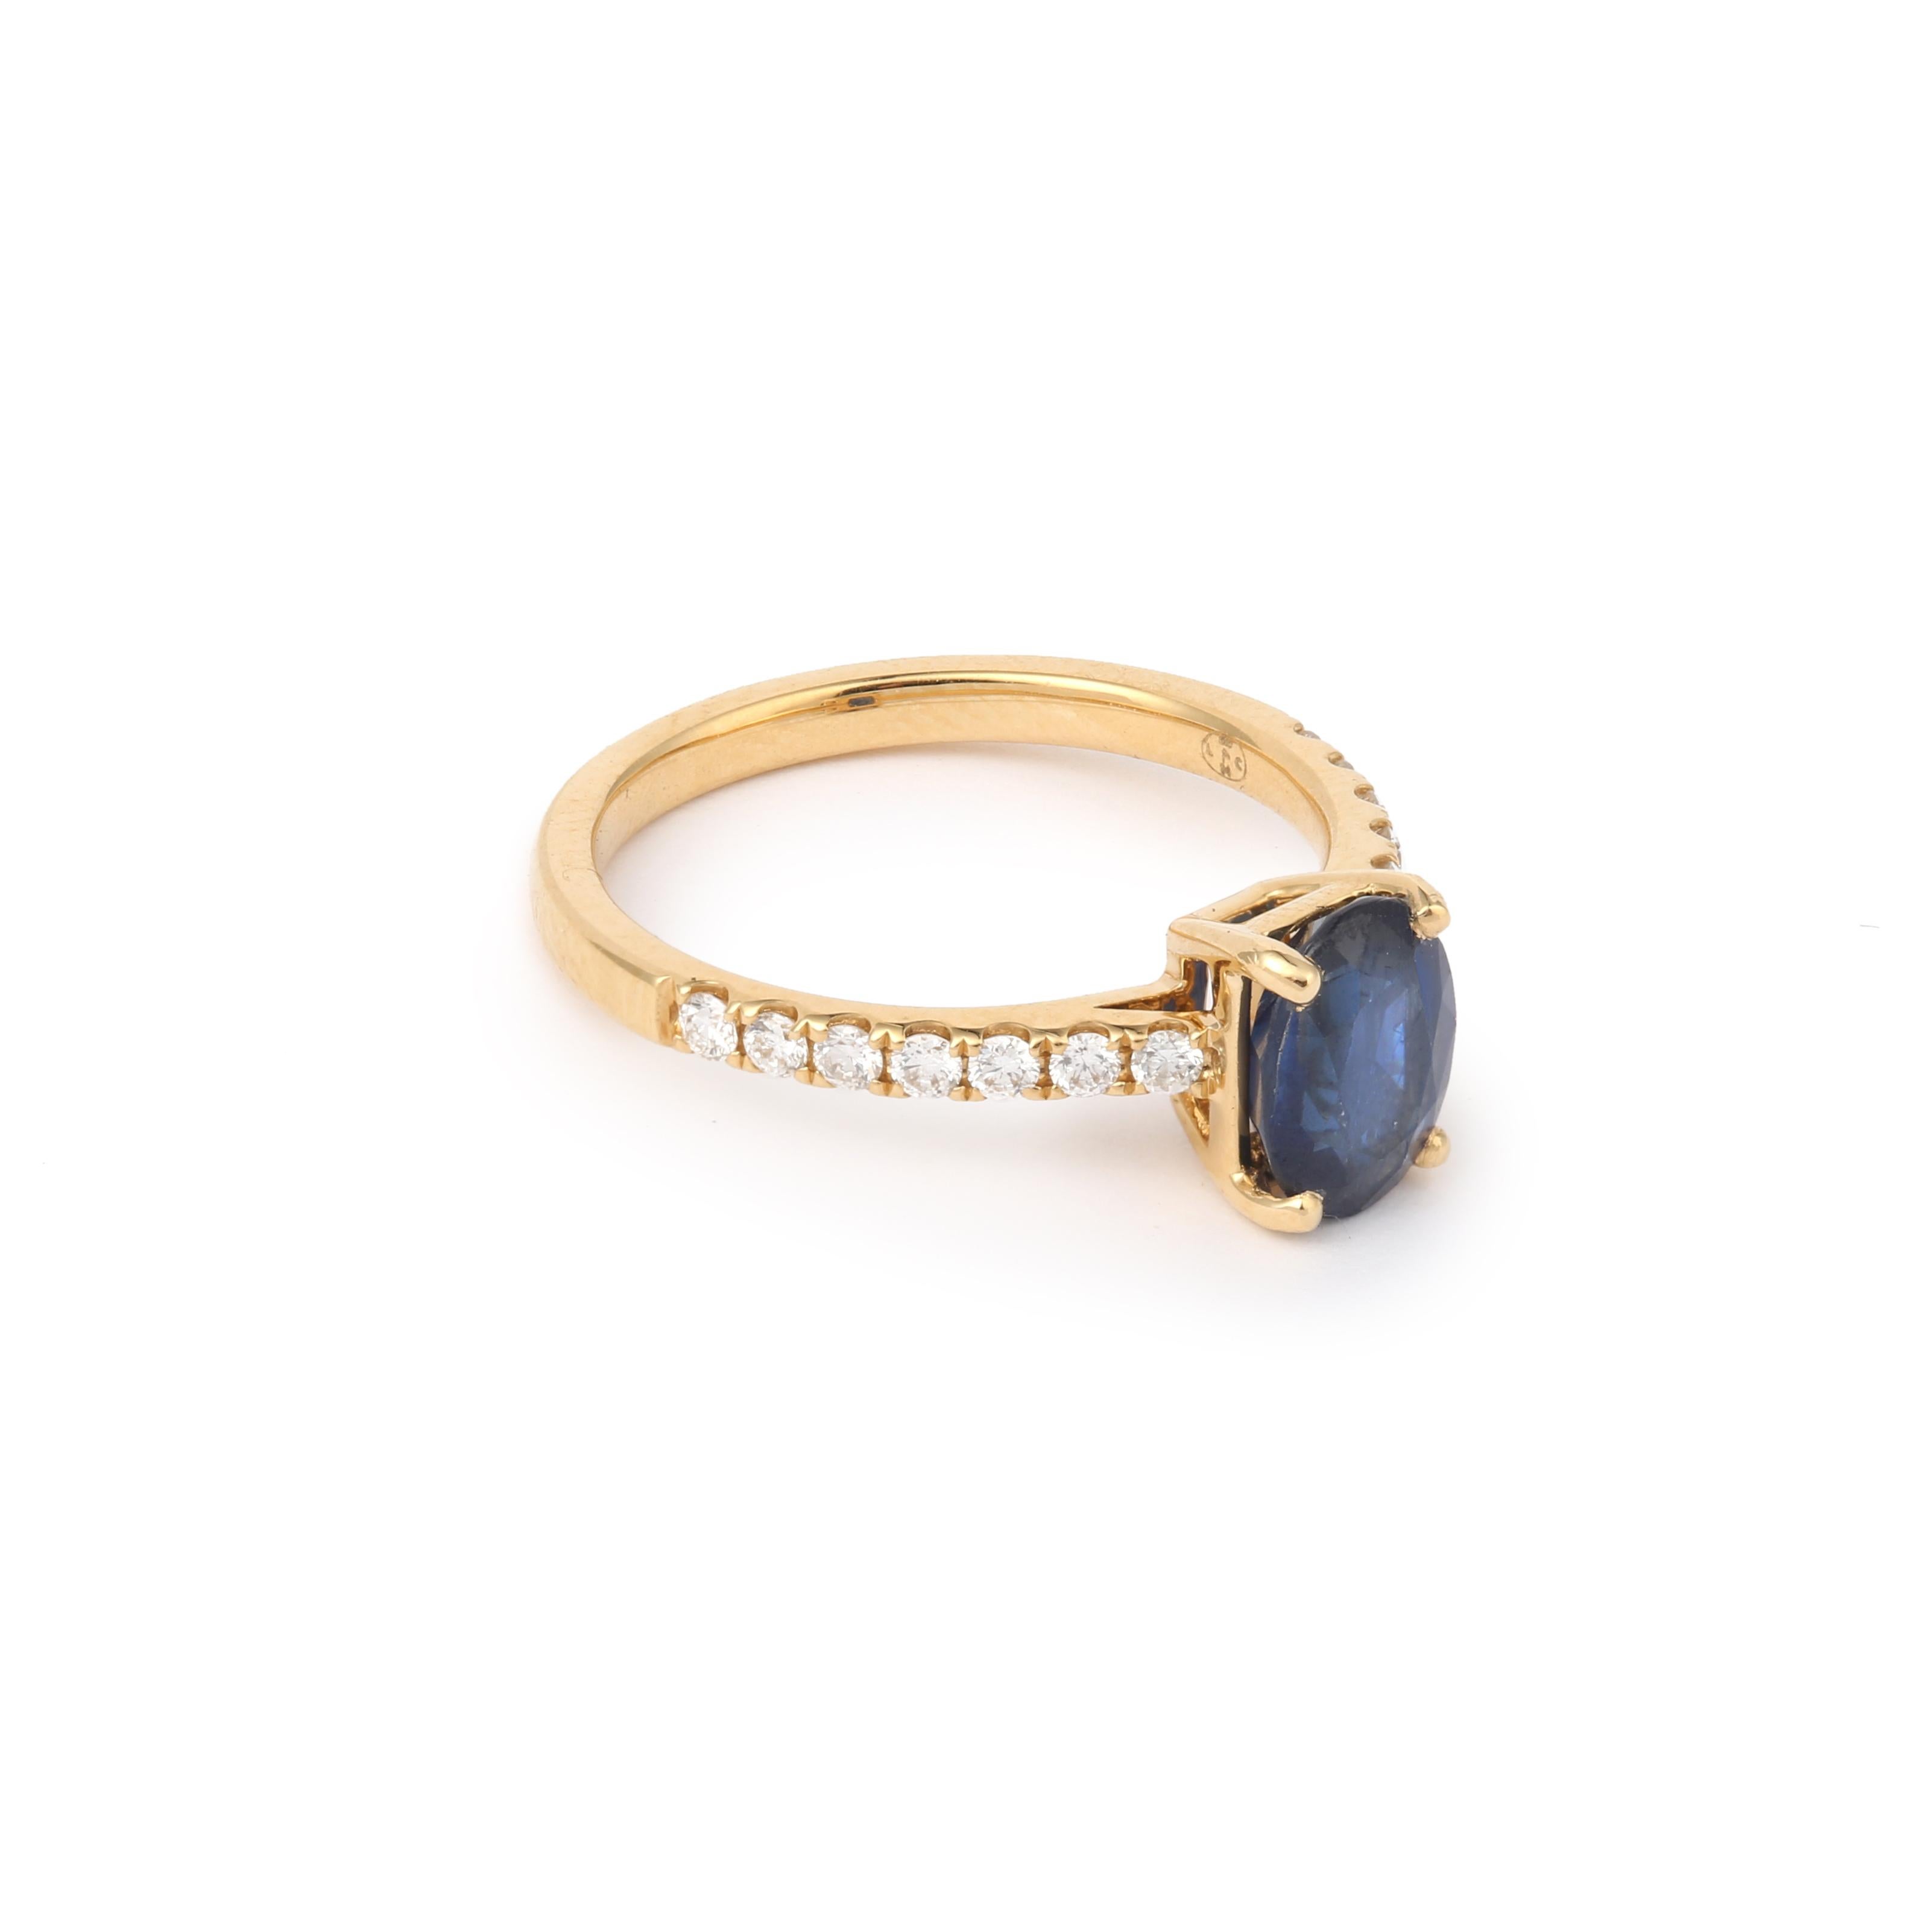 Yellow gold ring set with an oval-cut sapphire set with diamonds.

Weight of the sapphire : 1.62 carats

Total weight of diamonds: 0.27 carats

Dimensions: 8 x 20.32 x 6.01 mm (0.315 x 0.800 x 0.236 inch)

Finger size : 54 (US : 6 3/4)

Ring weight: